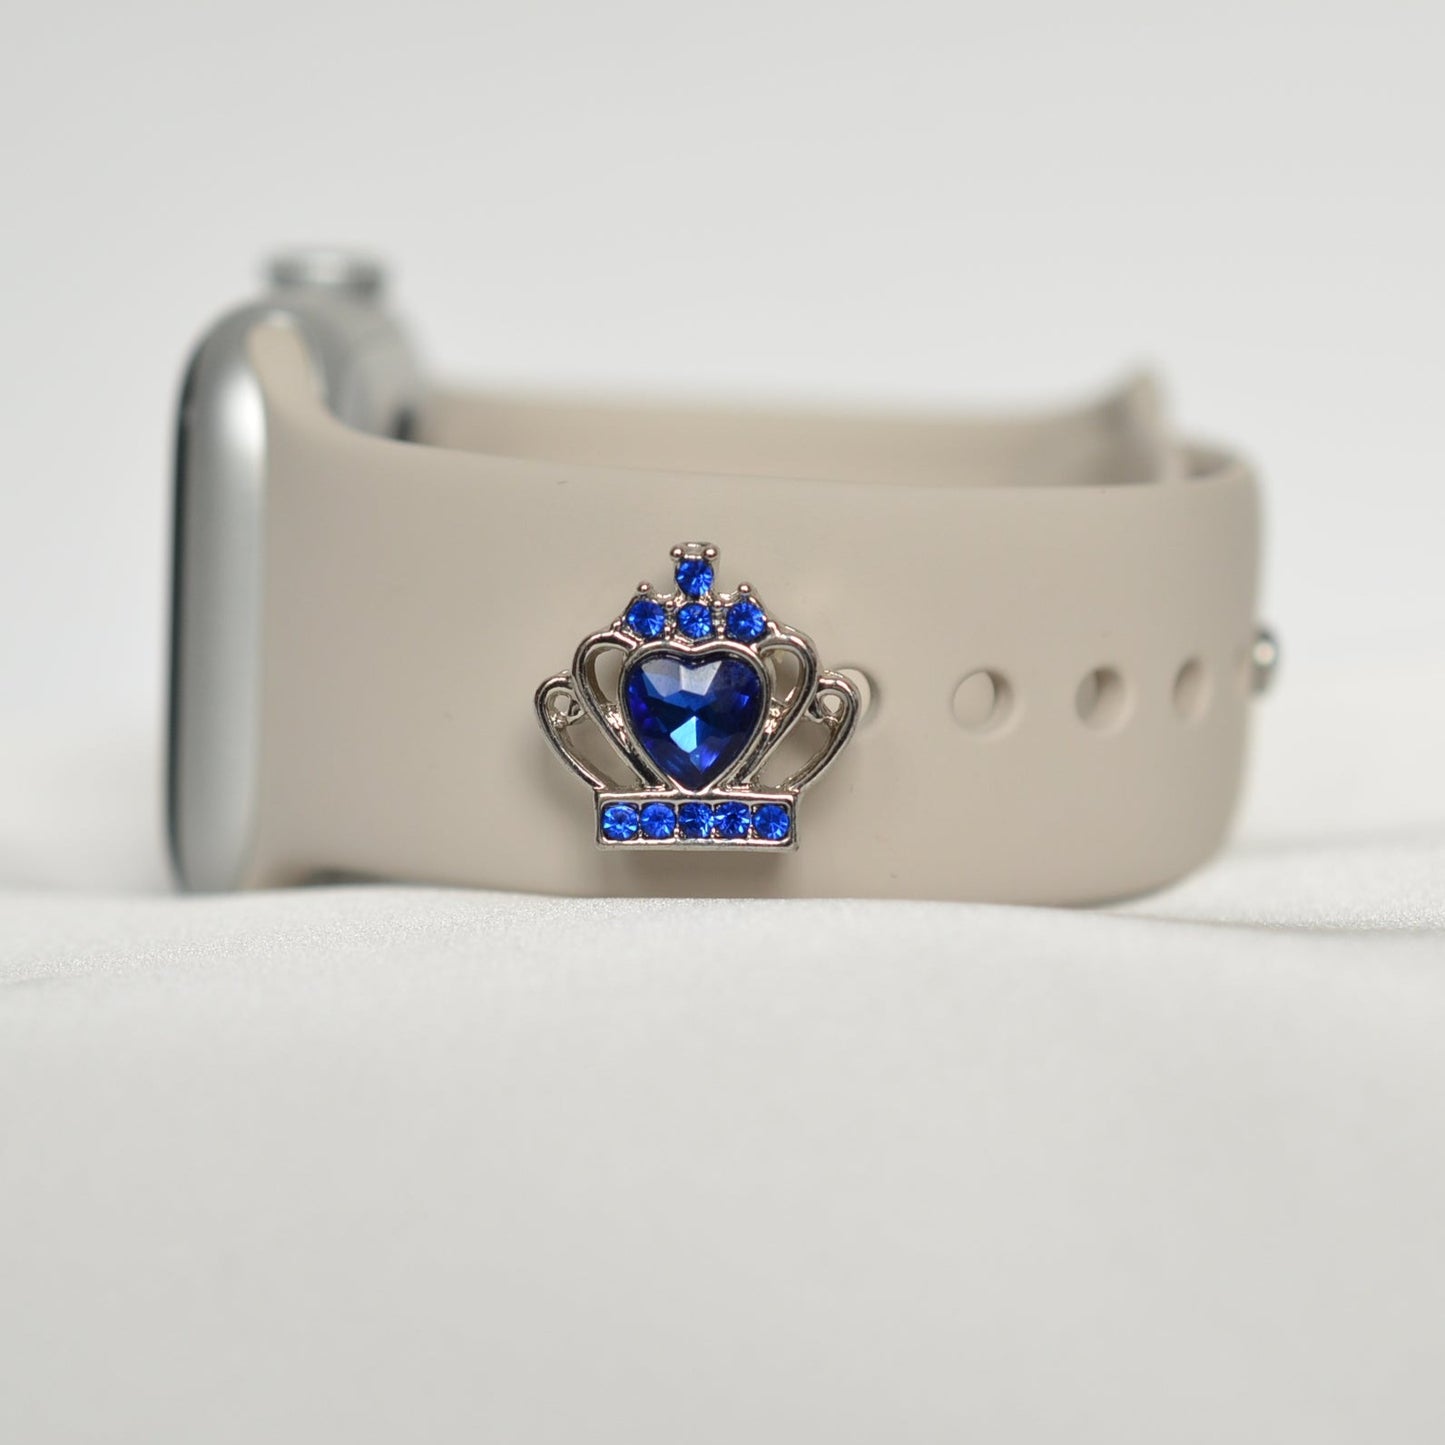 Blue Crown Charm for Belt, Bag and Watch Bands